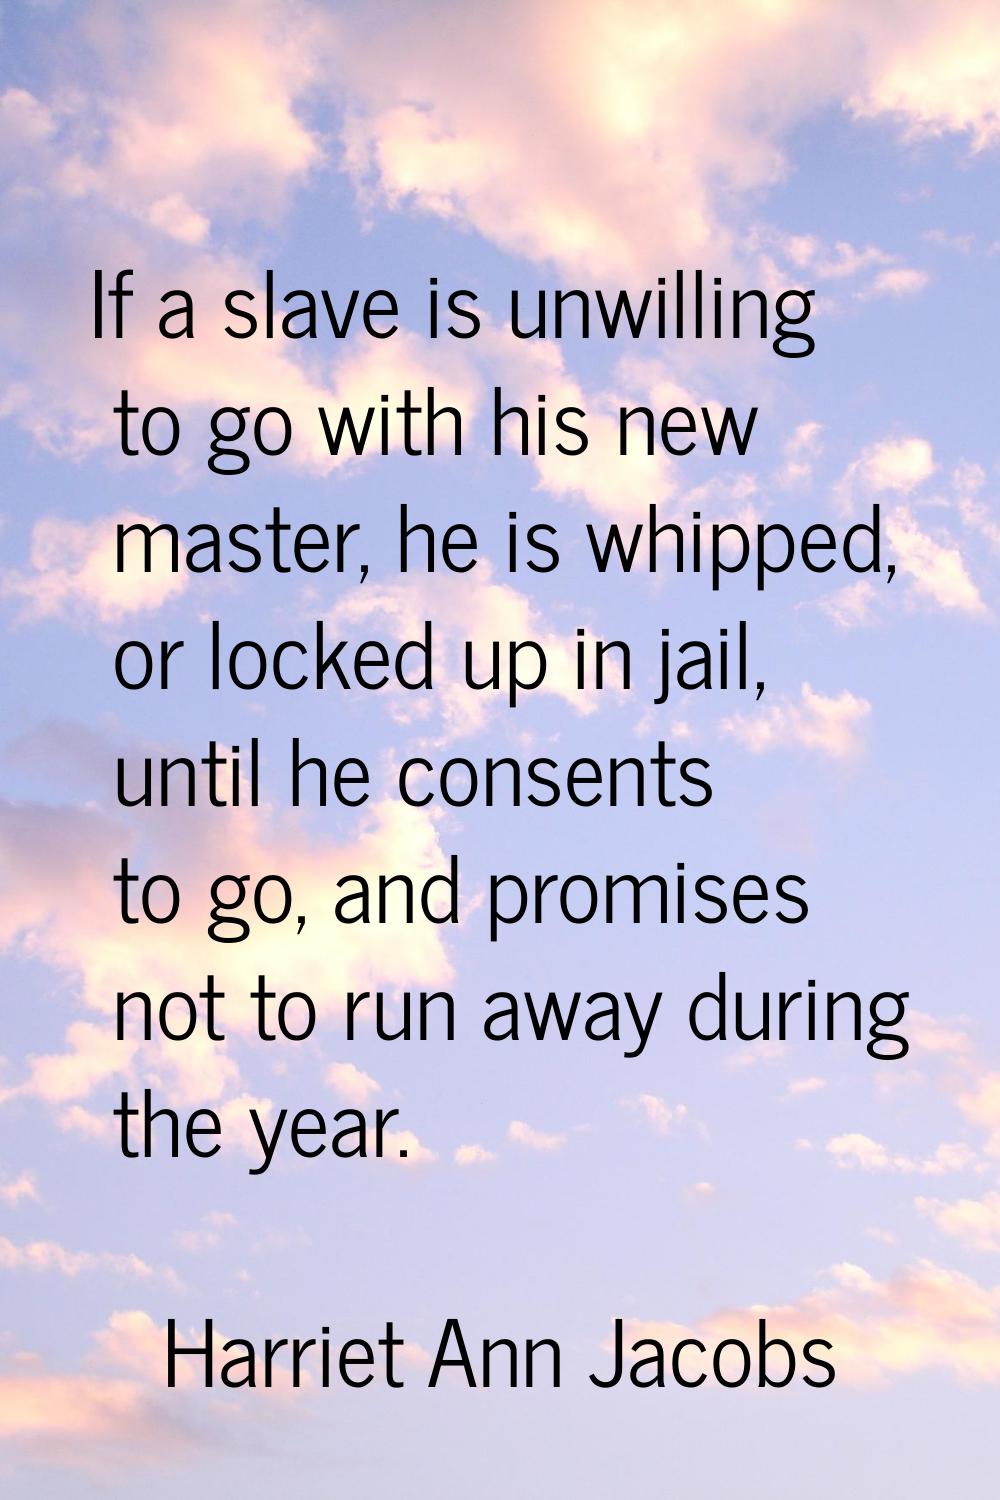 If a slave is unwilling to go with his new master, he is whipped, or locked up in jail, until he co